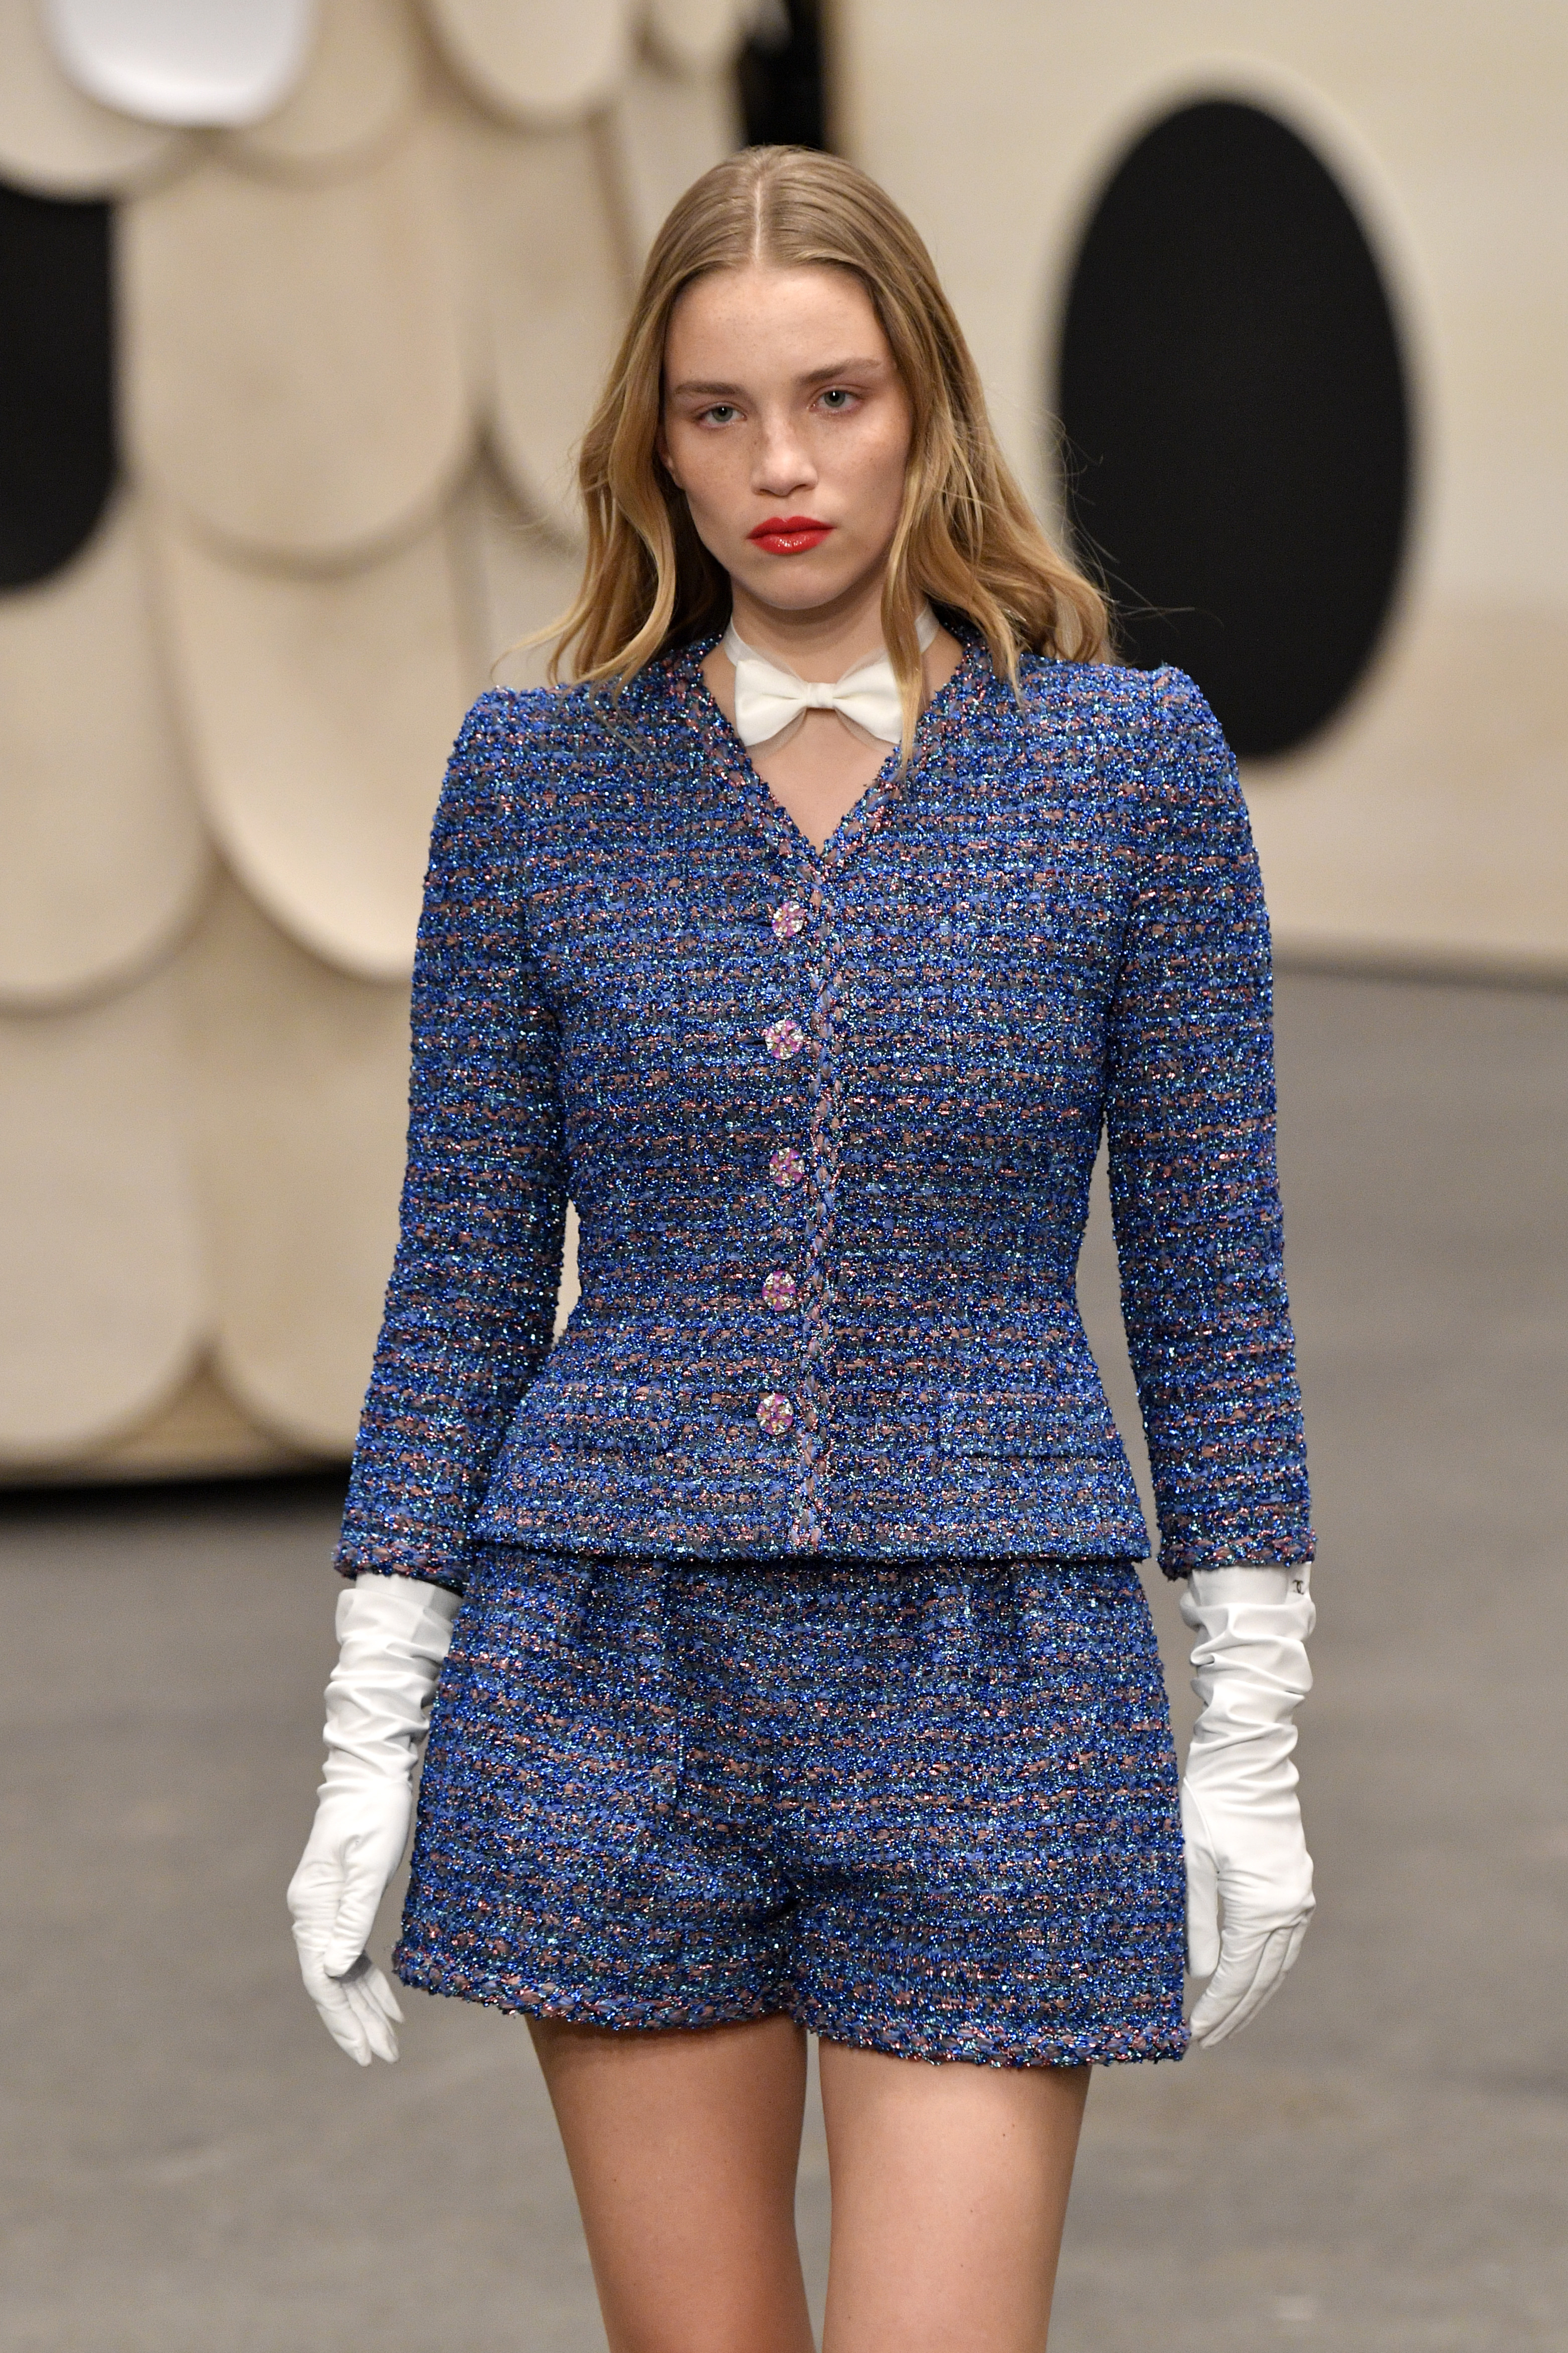 Chanel Seeks to Reinvent the Power Suit With a Retro Spring Haute Couture  Collection - Fashionista